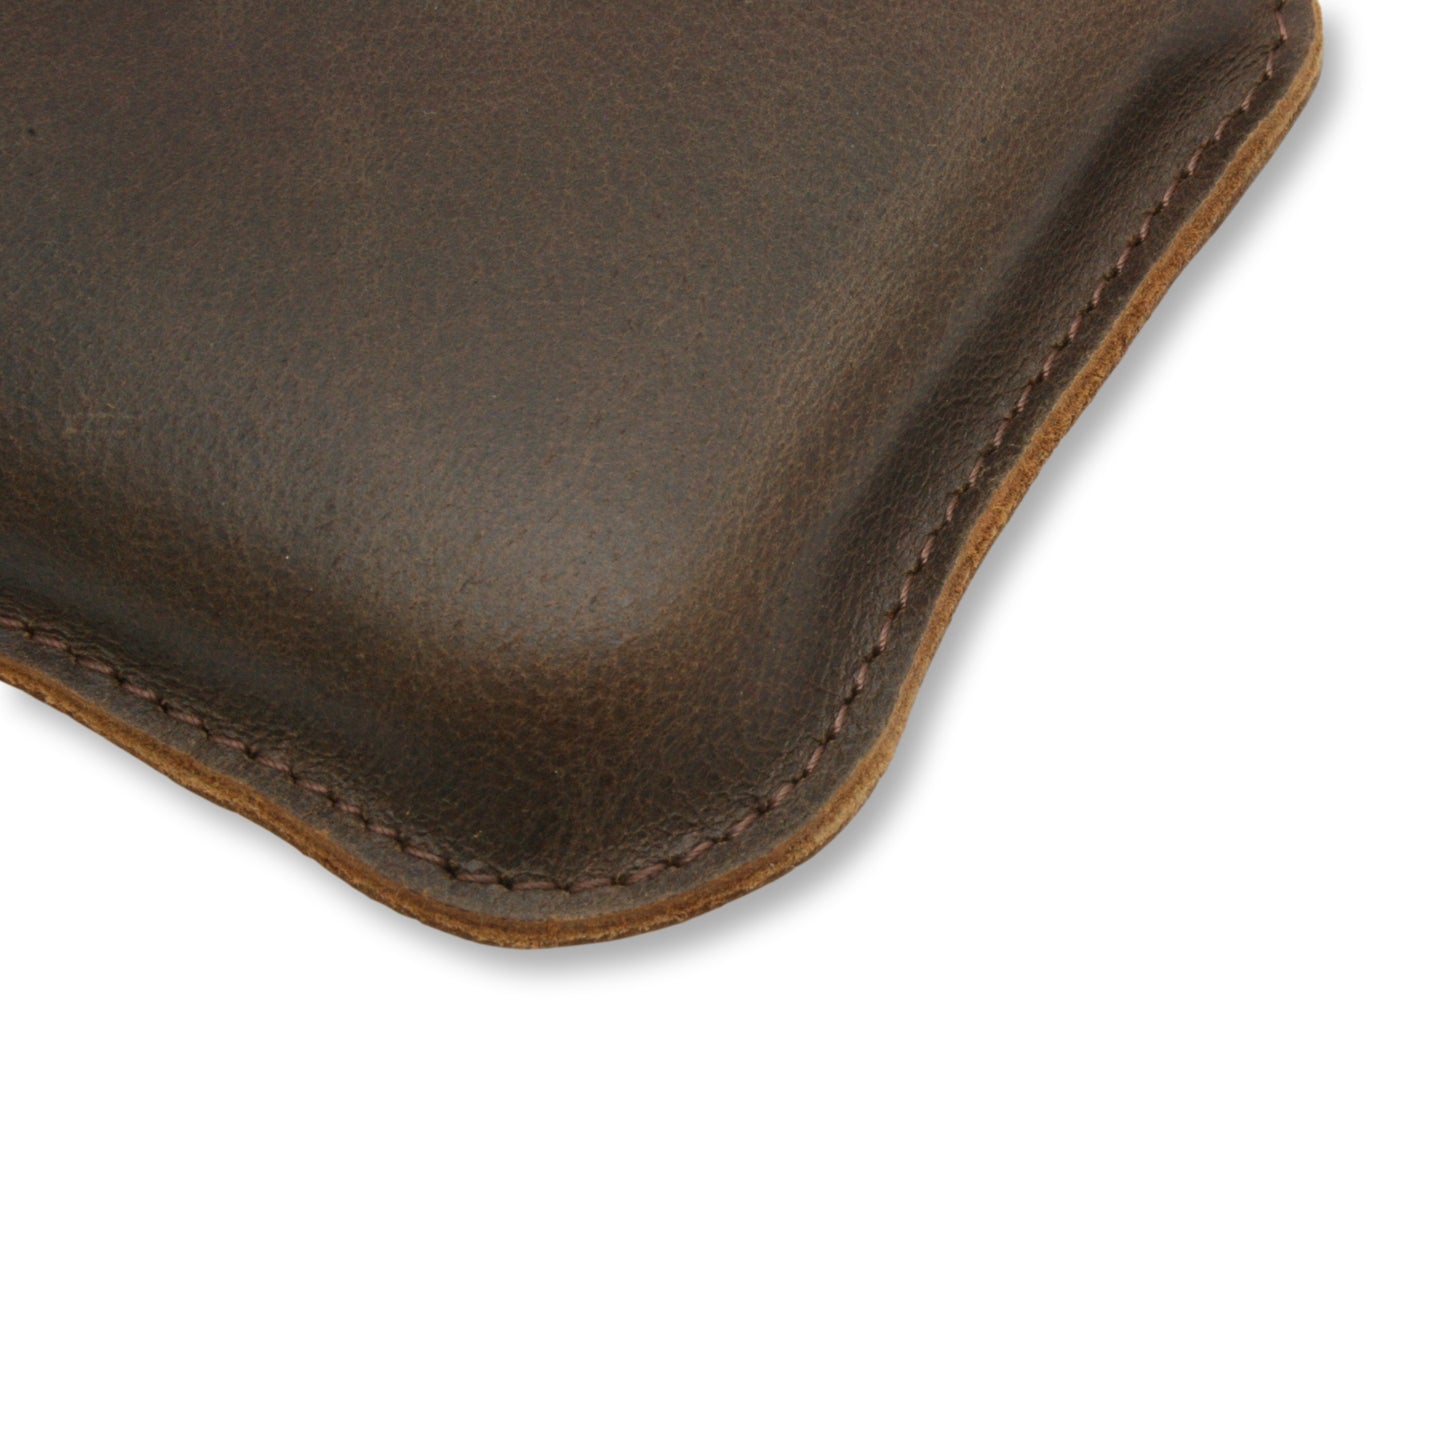 Popper Leather Case